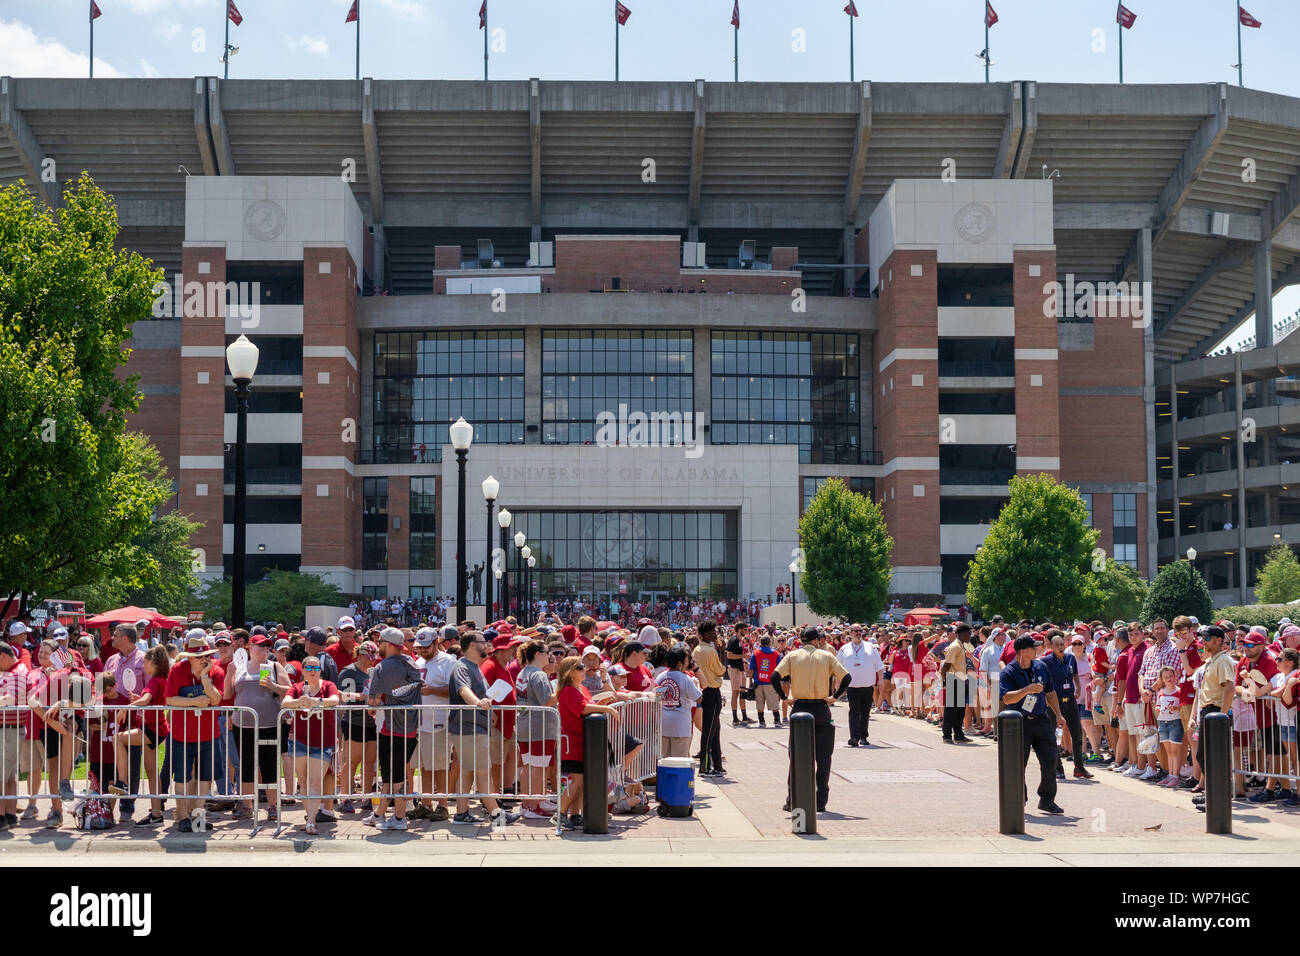 Tuscaloosa, Alabama, USA. 7th Sep, 2019. Fans line both sides of the main entrance to Bryant Denny Stadium in Tuscaloosa, Alabama waiting for the players to arrive. Despite temperatures in the 90's, a huge crowd was on hand for the Alabama vs New Mexico game on Saturday, September 7th, 2019. (Credit Image: © Tim ThompsonZUMA Wire) Stock Photo